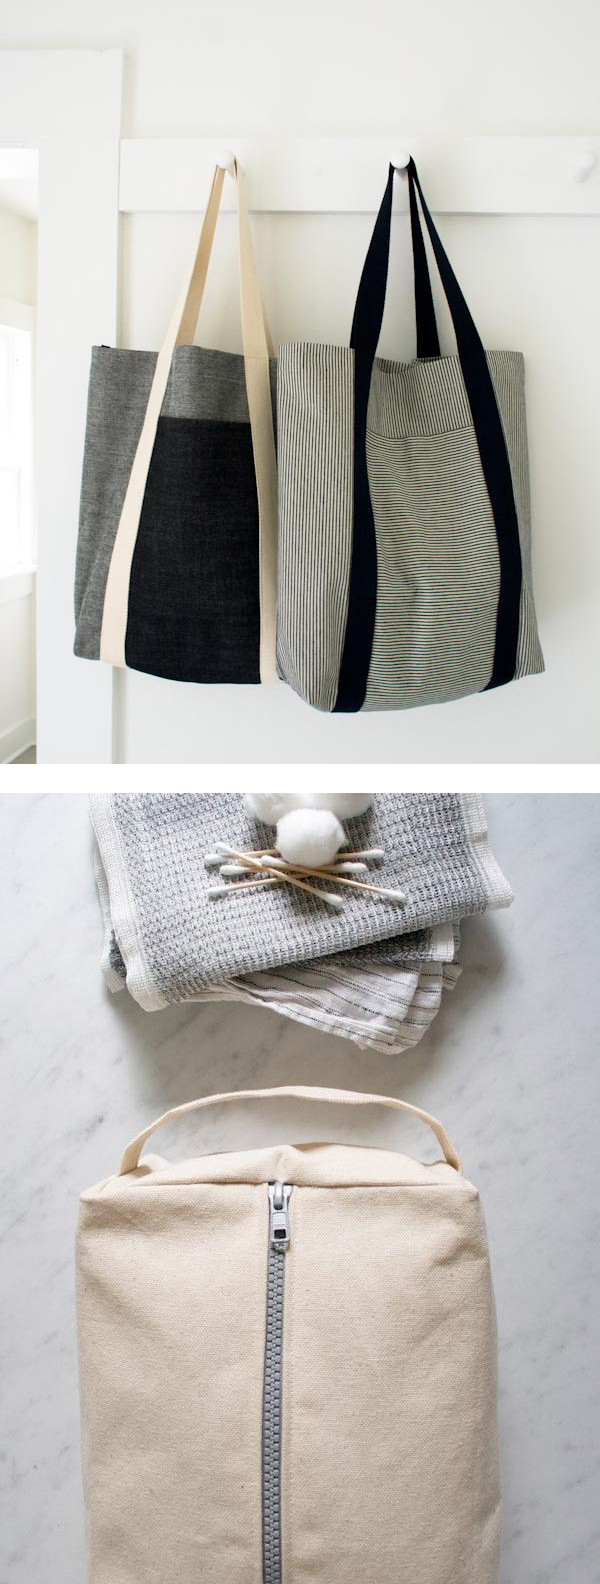 DIY Sew Gifts
 10 DIY Holiday Gift Ideas – Blog – Cotton & Flax